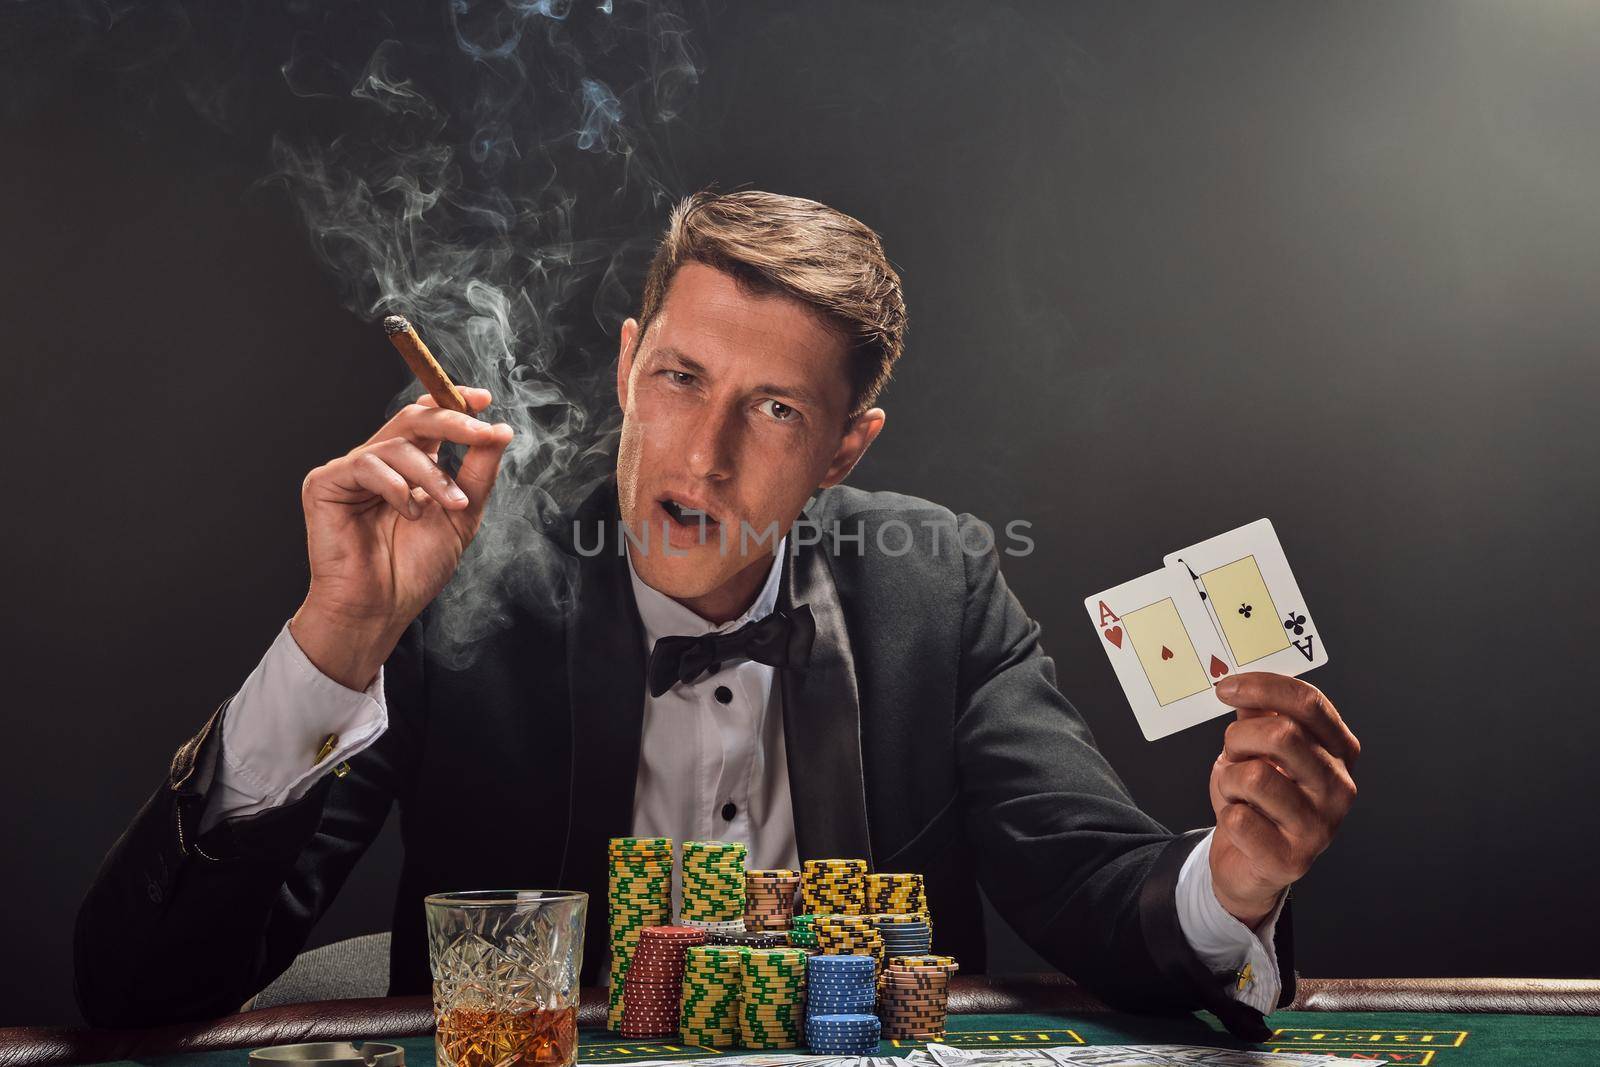 Good-looking guy in a black slassic suit and white shirt is playing poker sitting at the table at casino in smoke, against a white spotlight. He rejoicing his win showing two aces in his hand, smoking a cigar and looking at the camera. Gambling addiction. Sincere emotions and entertainment concept.